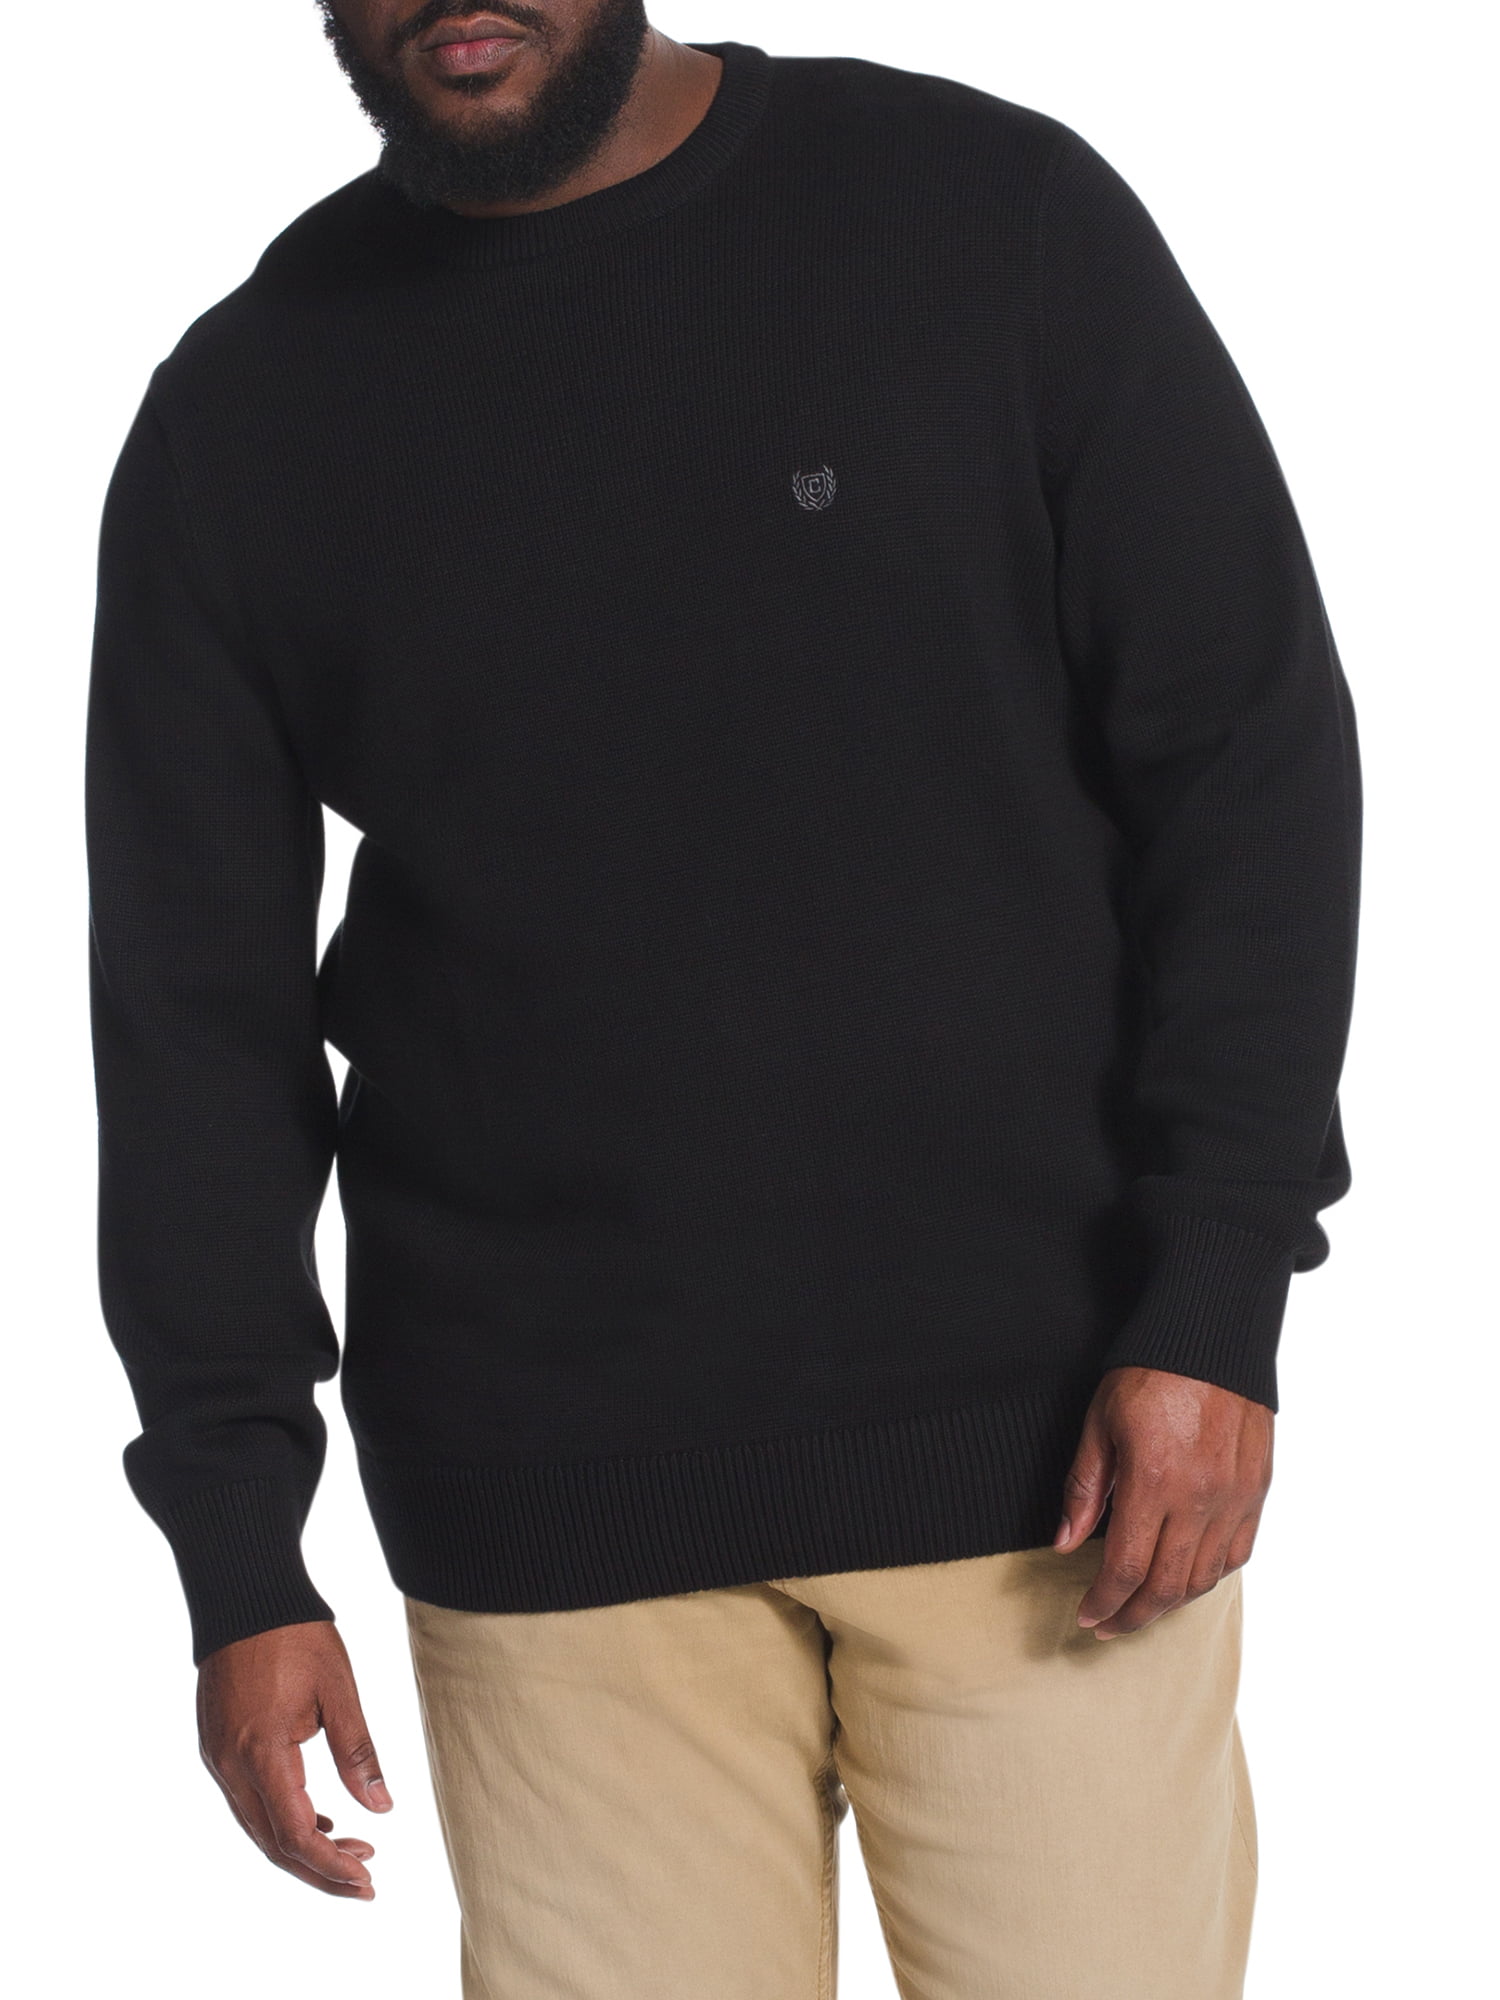 Chaps Mens Big and Tall Classic Fit Cotton Crewneck Sweater